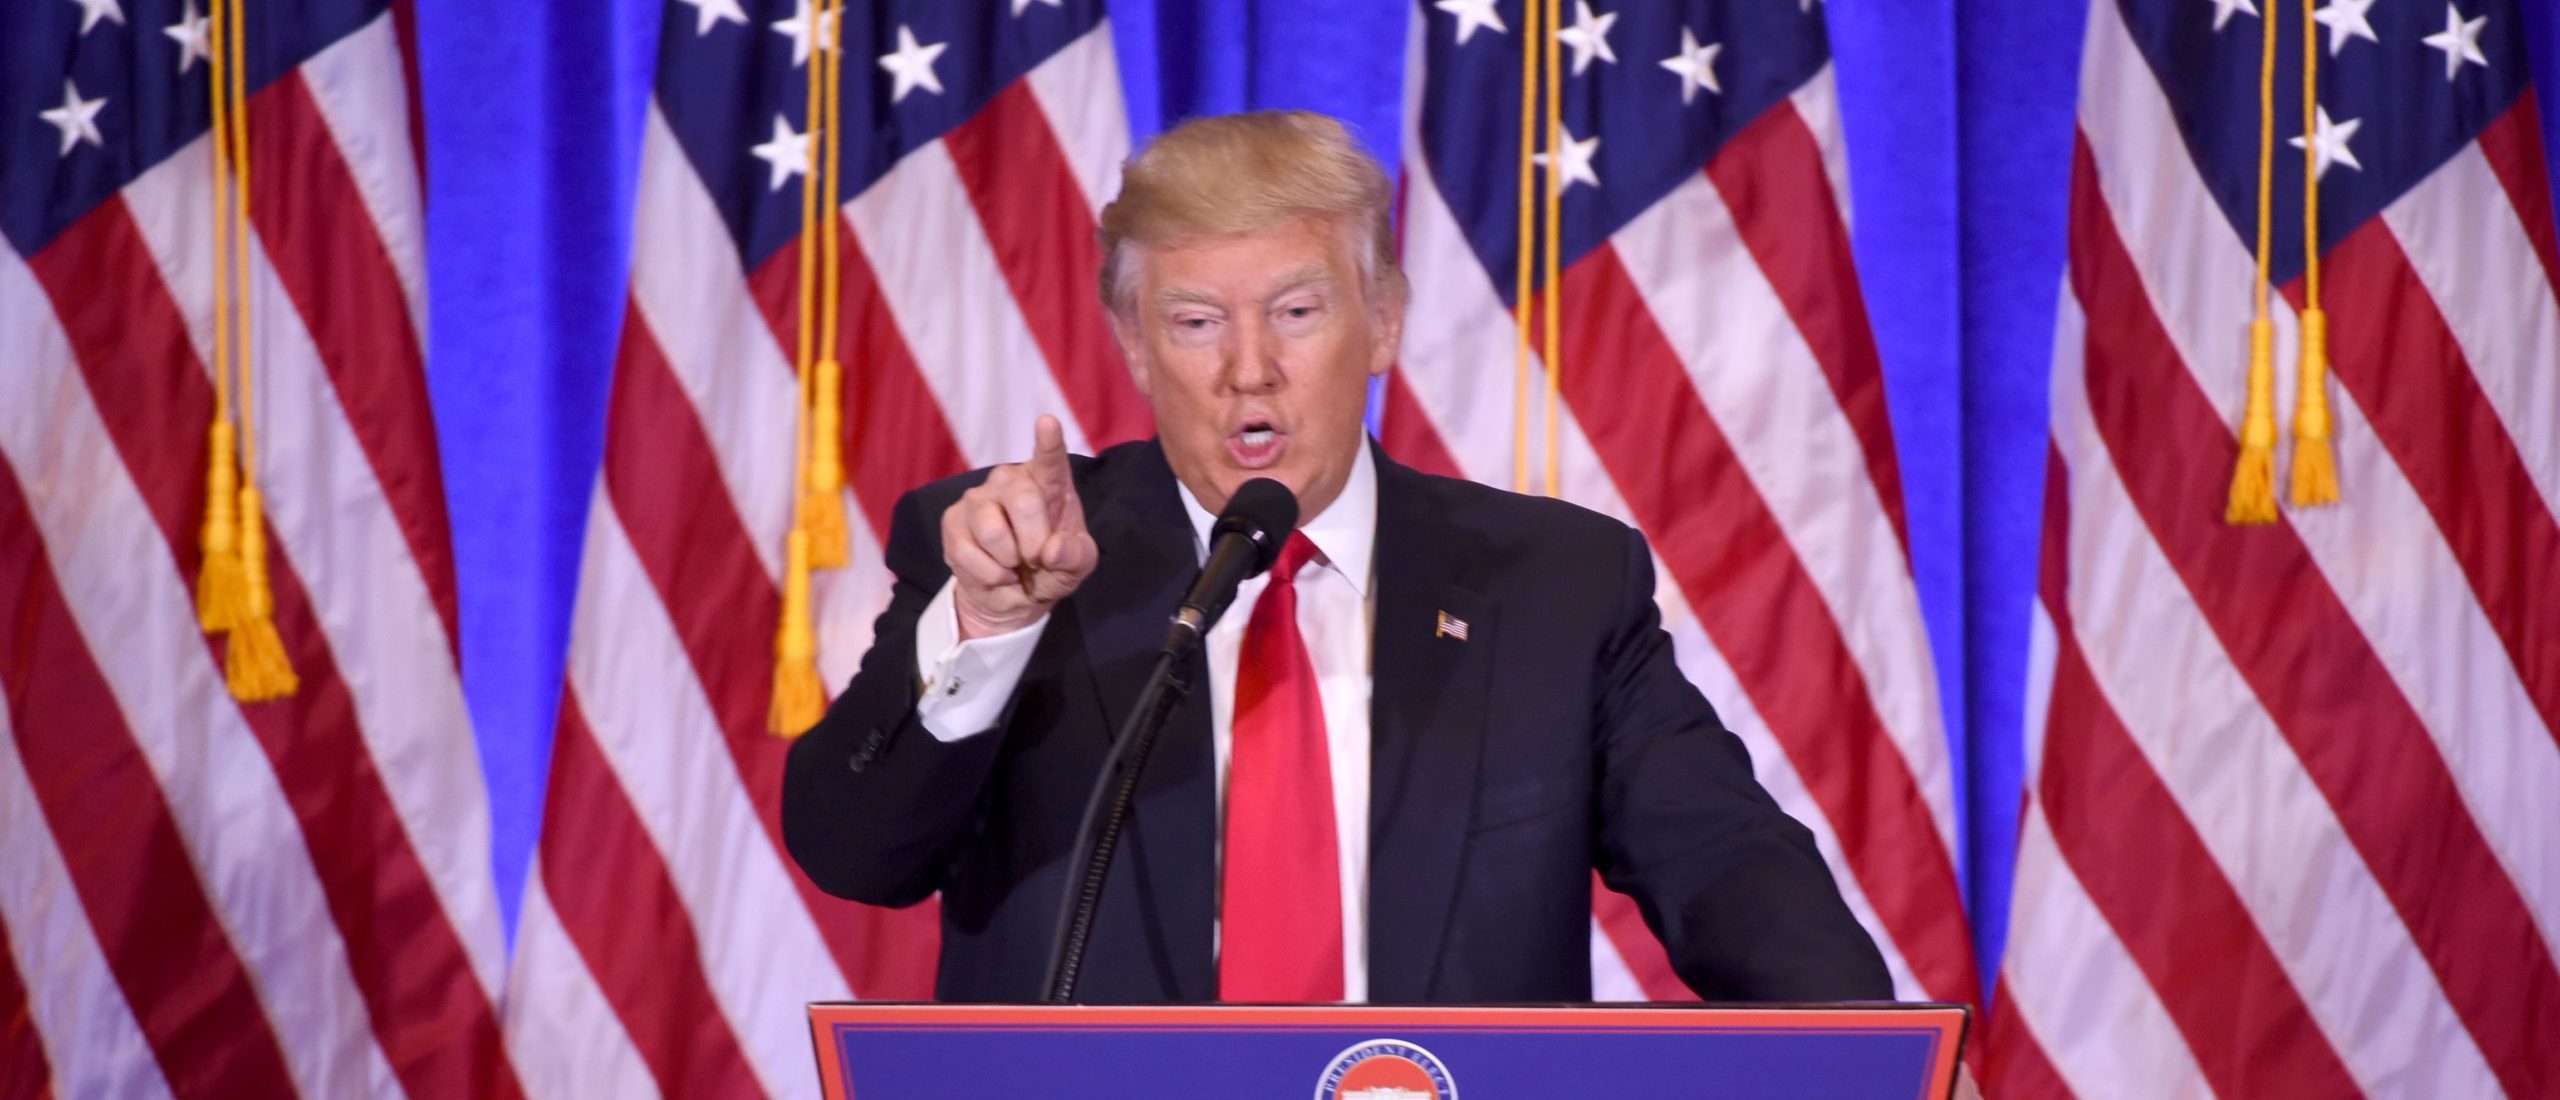 US President-elect Donald Trump adresses a CNN journalist (Jim Acosta, unseen)and refuses toanswer his question during a press conference on January 11, 2017 in New York. Donald Trump is holding his first news conference in nearly six months Wednesday, amid explosive allegations over his ties to Russia, a little more than a week before his inauguration. / AFP / DON EMMERT (DON EMMERT/AFP via Getty Images)